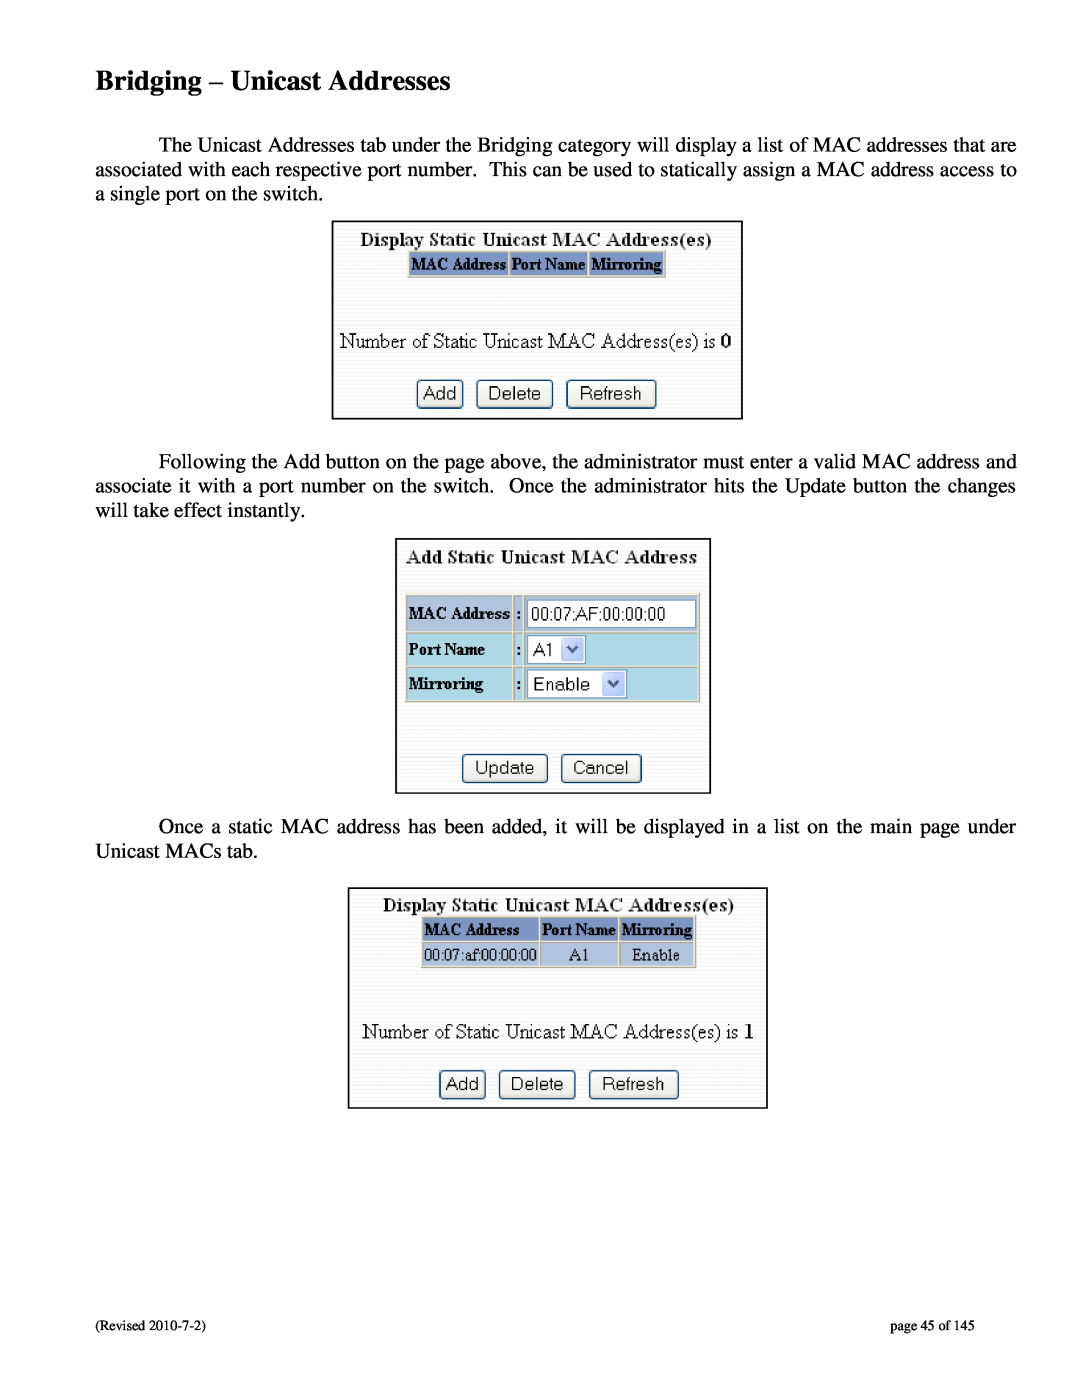 N-Tron 9000 user manual Bridging - Unicast Addresses, page 45 of 